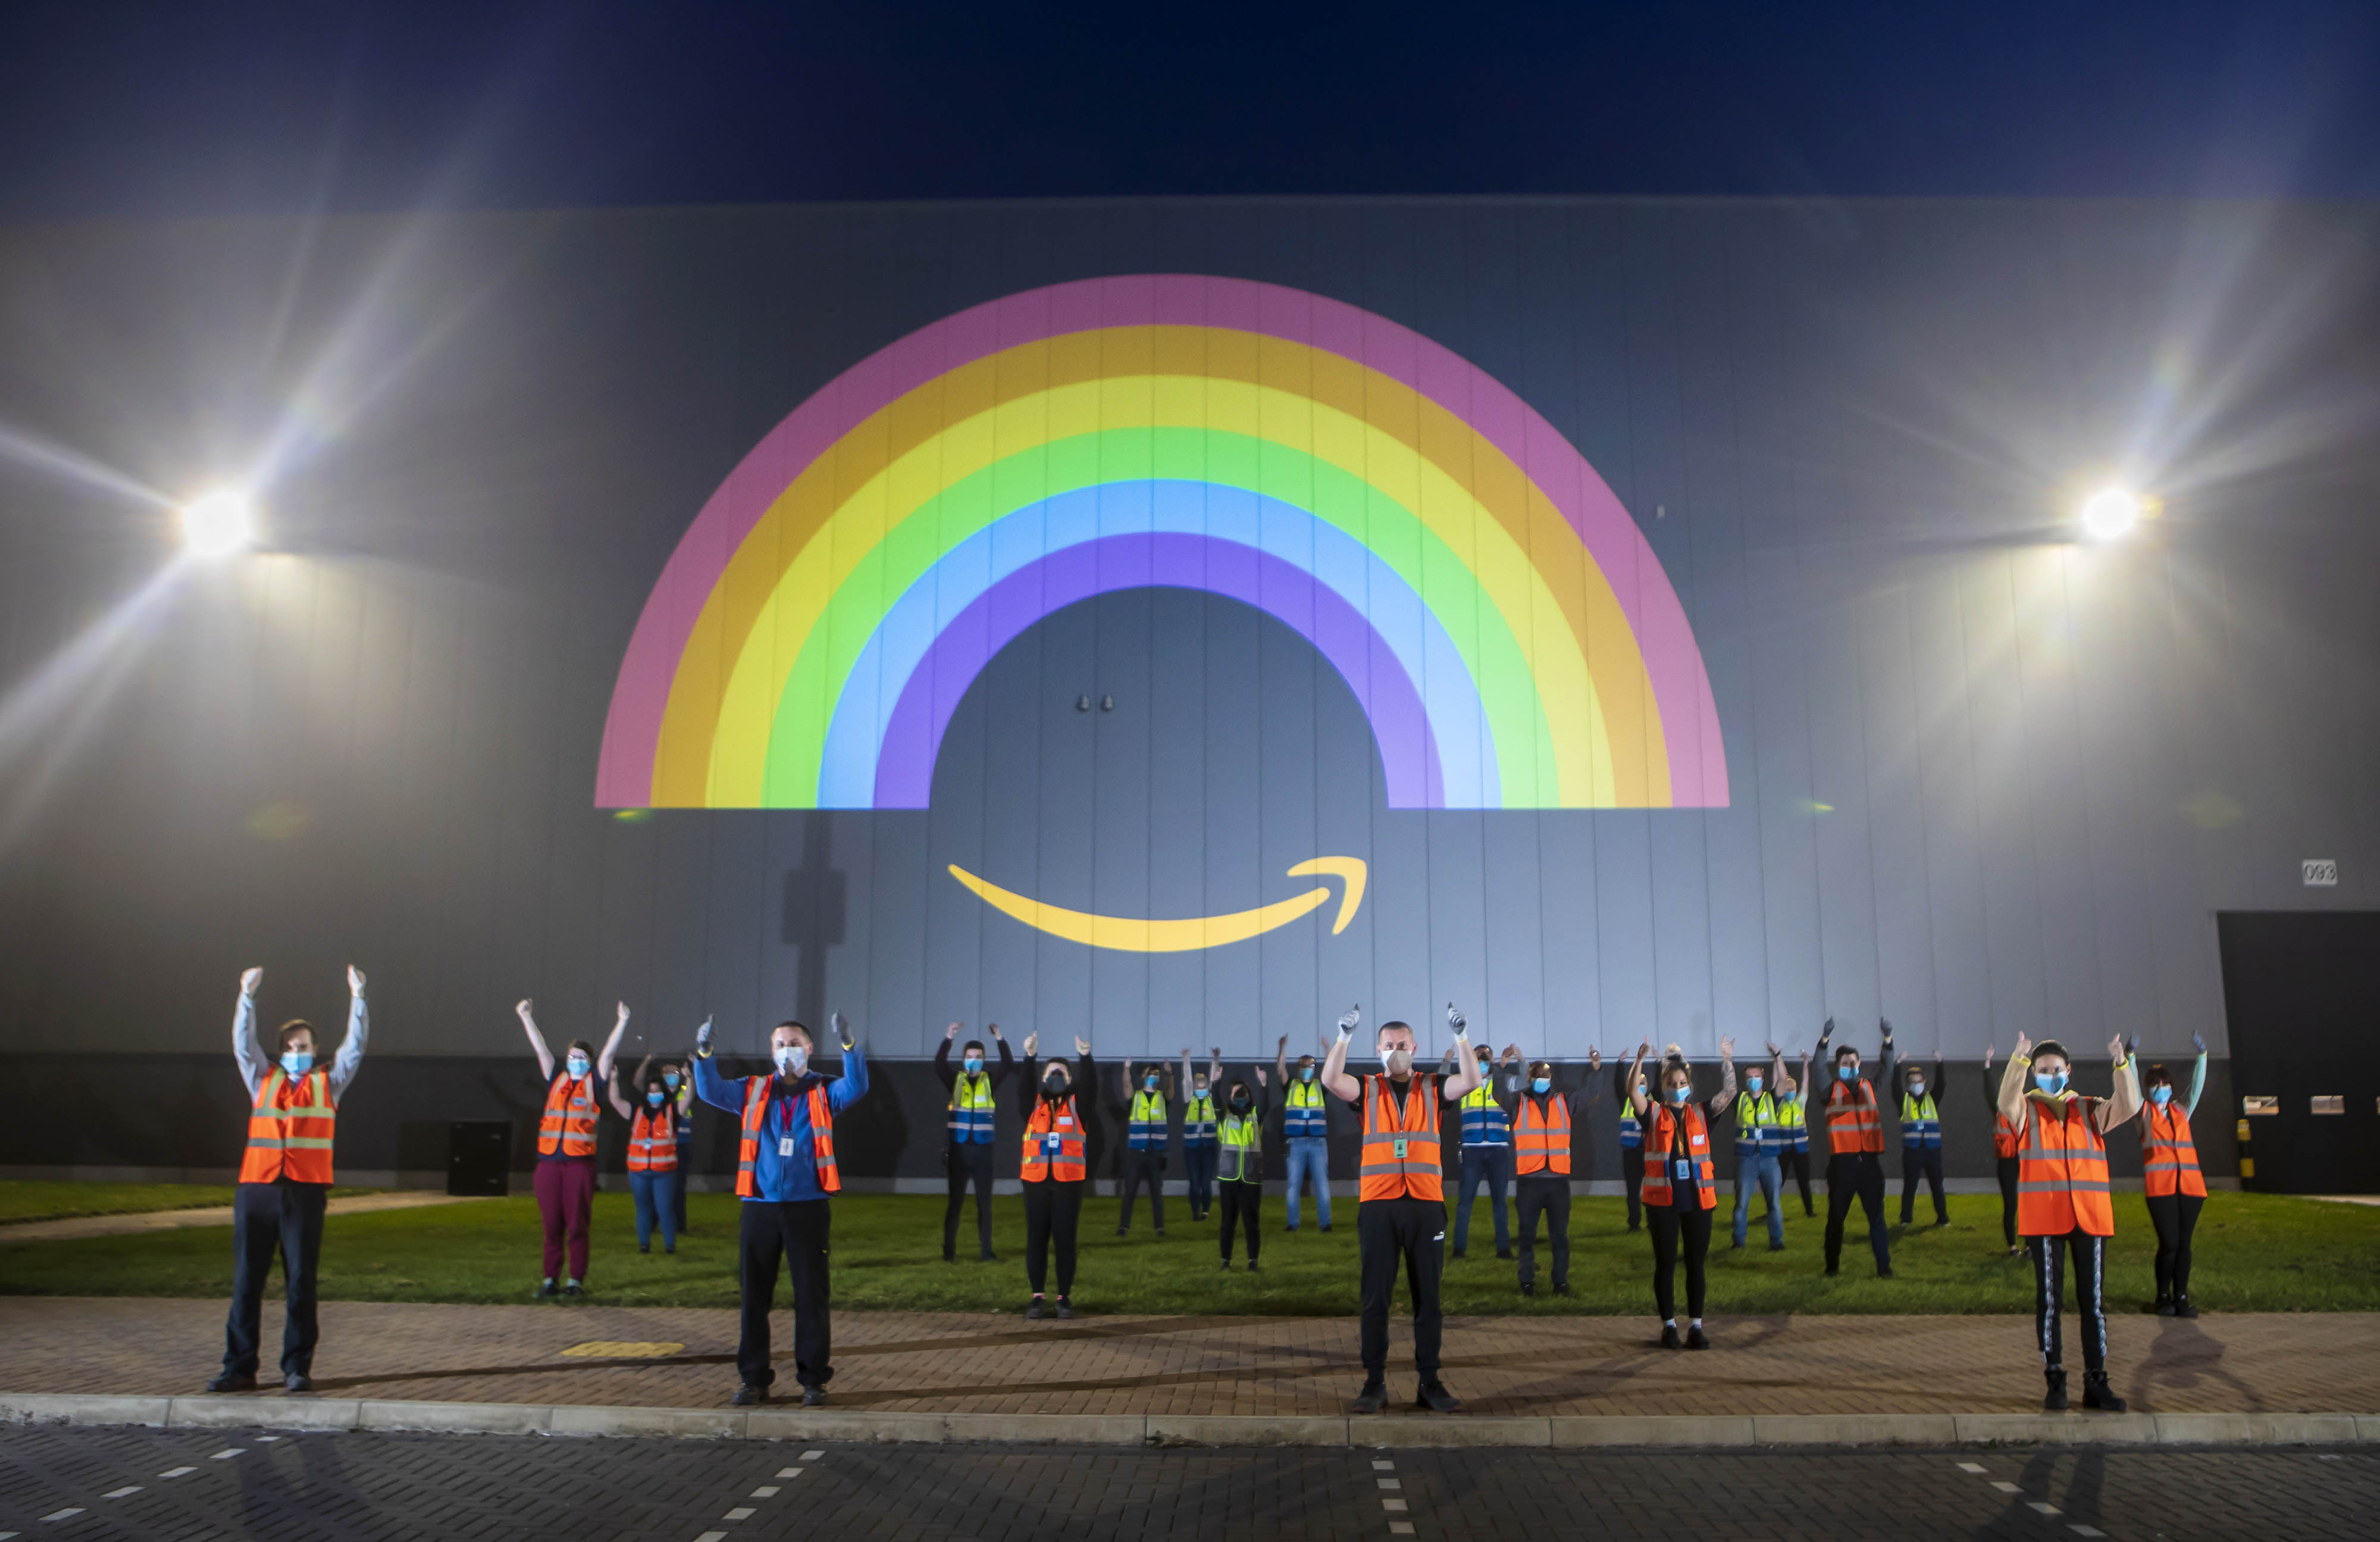 Amazon showed its thanks to the nations' key workers by lighting up its buildings around the country, including a giant rainbow projection at the Fulfilment Centre in Doncaster